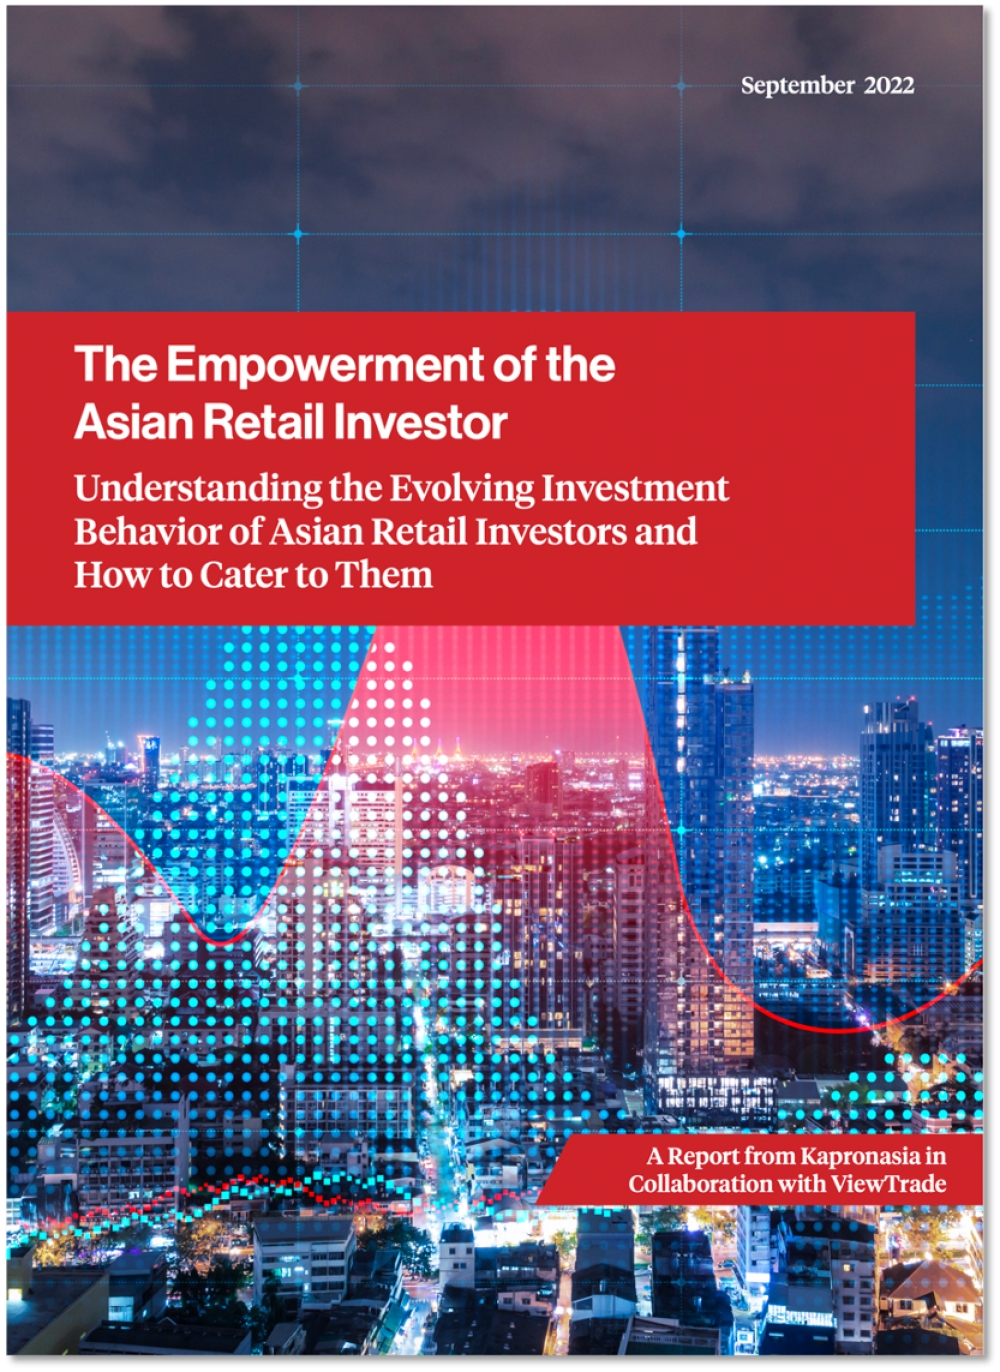 The Empowerment of the Asian Retail Investor - A Report from Kapronasia in Collaboration with ViewTrade